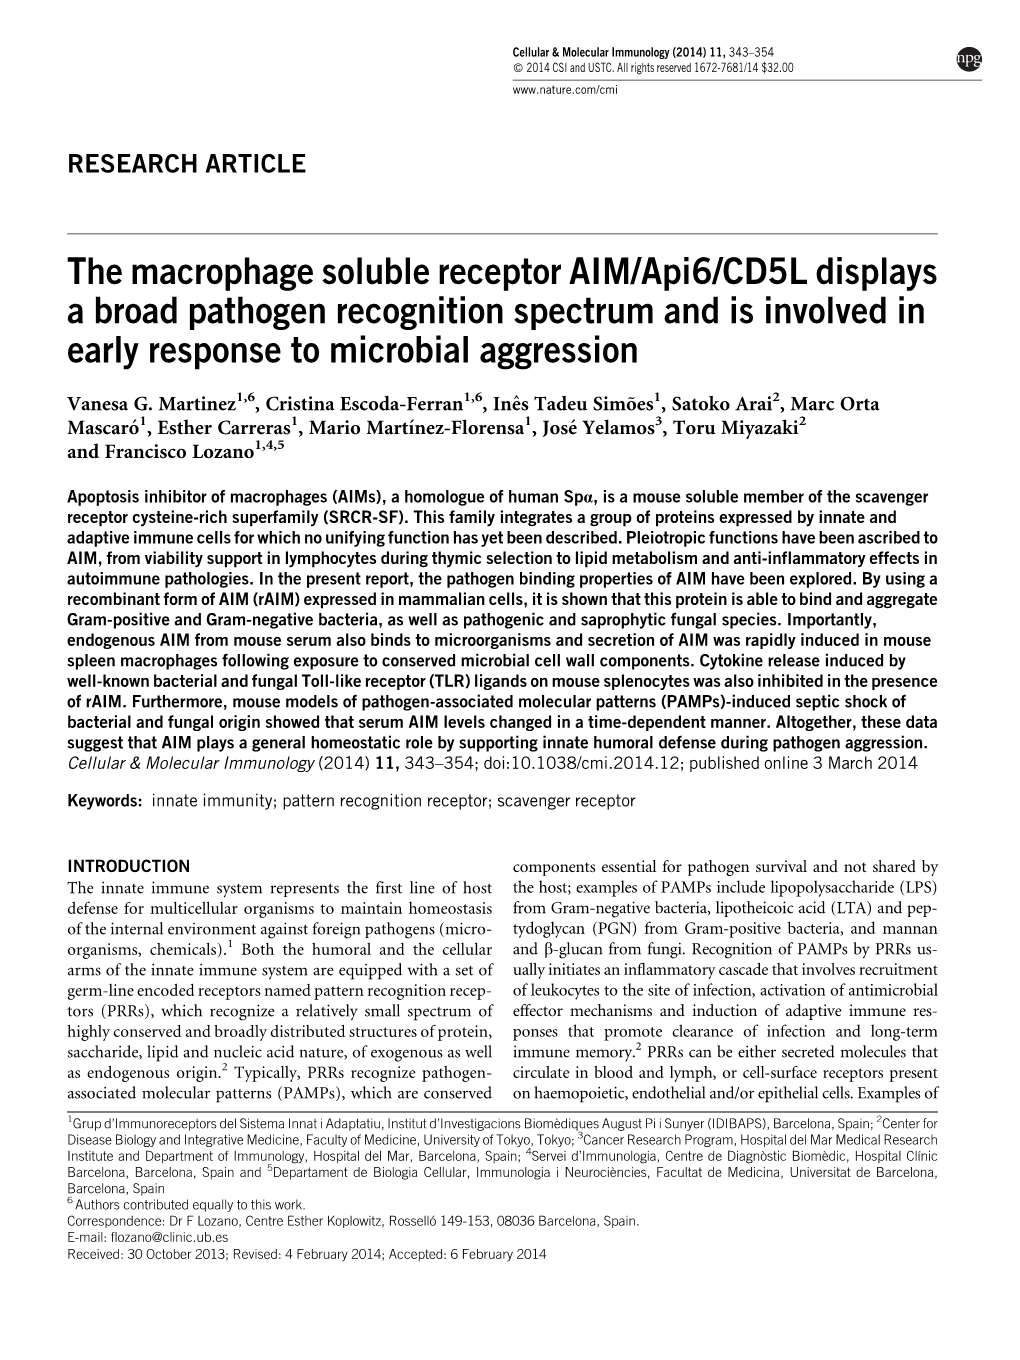 The Macrophage Soluble Receptor AIM/Api6/CD5L Displays a Broad Pathogen Recognition Spectrum and Is Involved in Early Response to Microbial Aggression